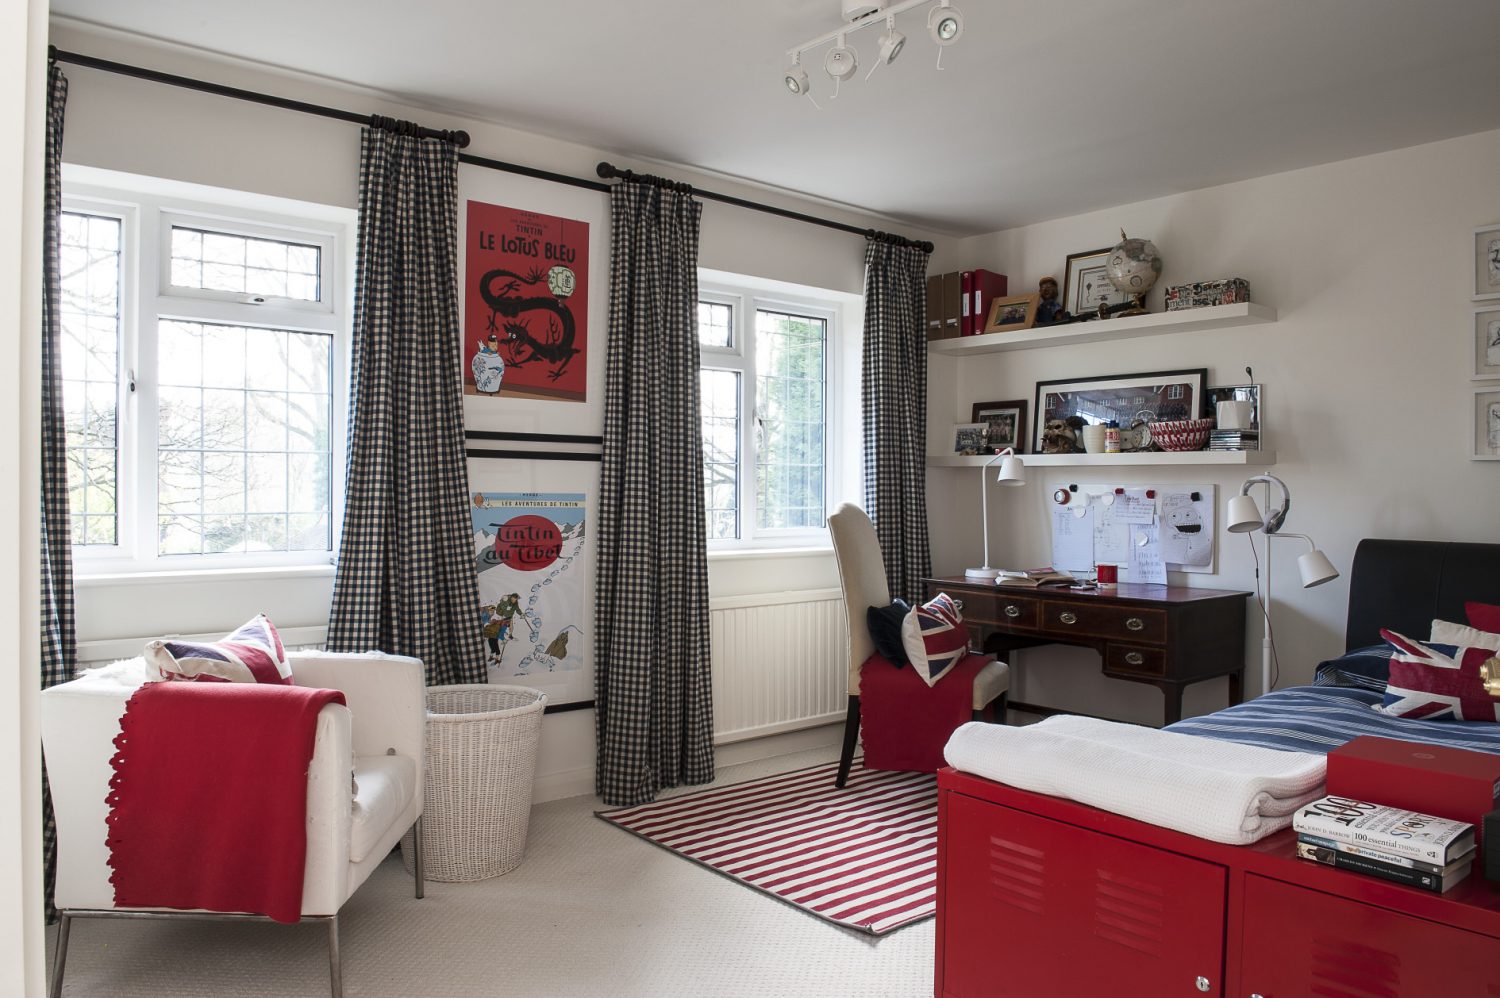 Adele’s son’s room is red and white and a pleasing juxtaposition of old and new